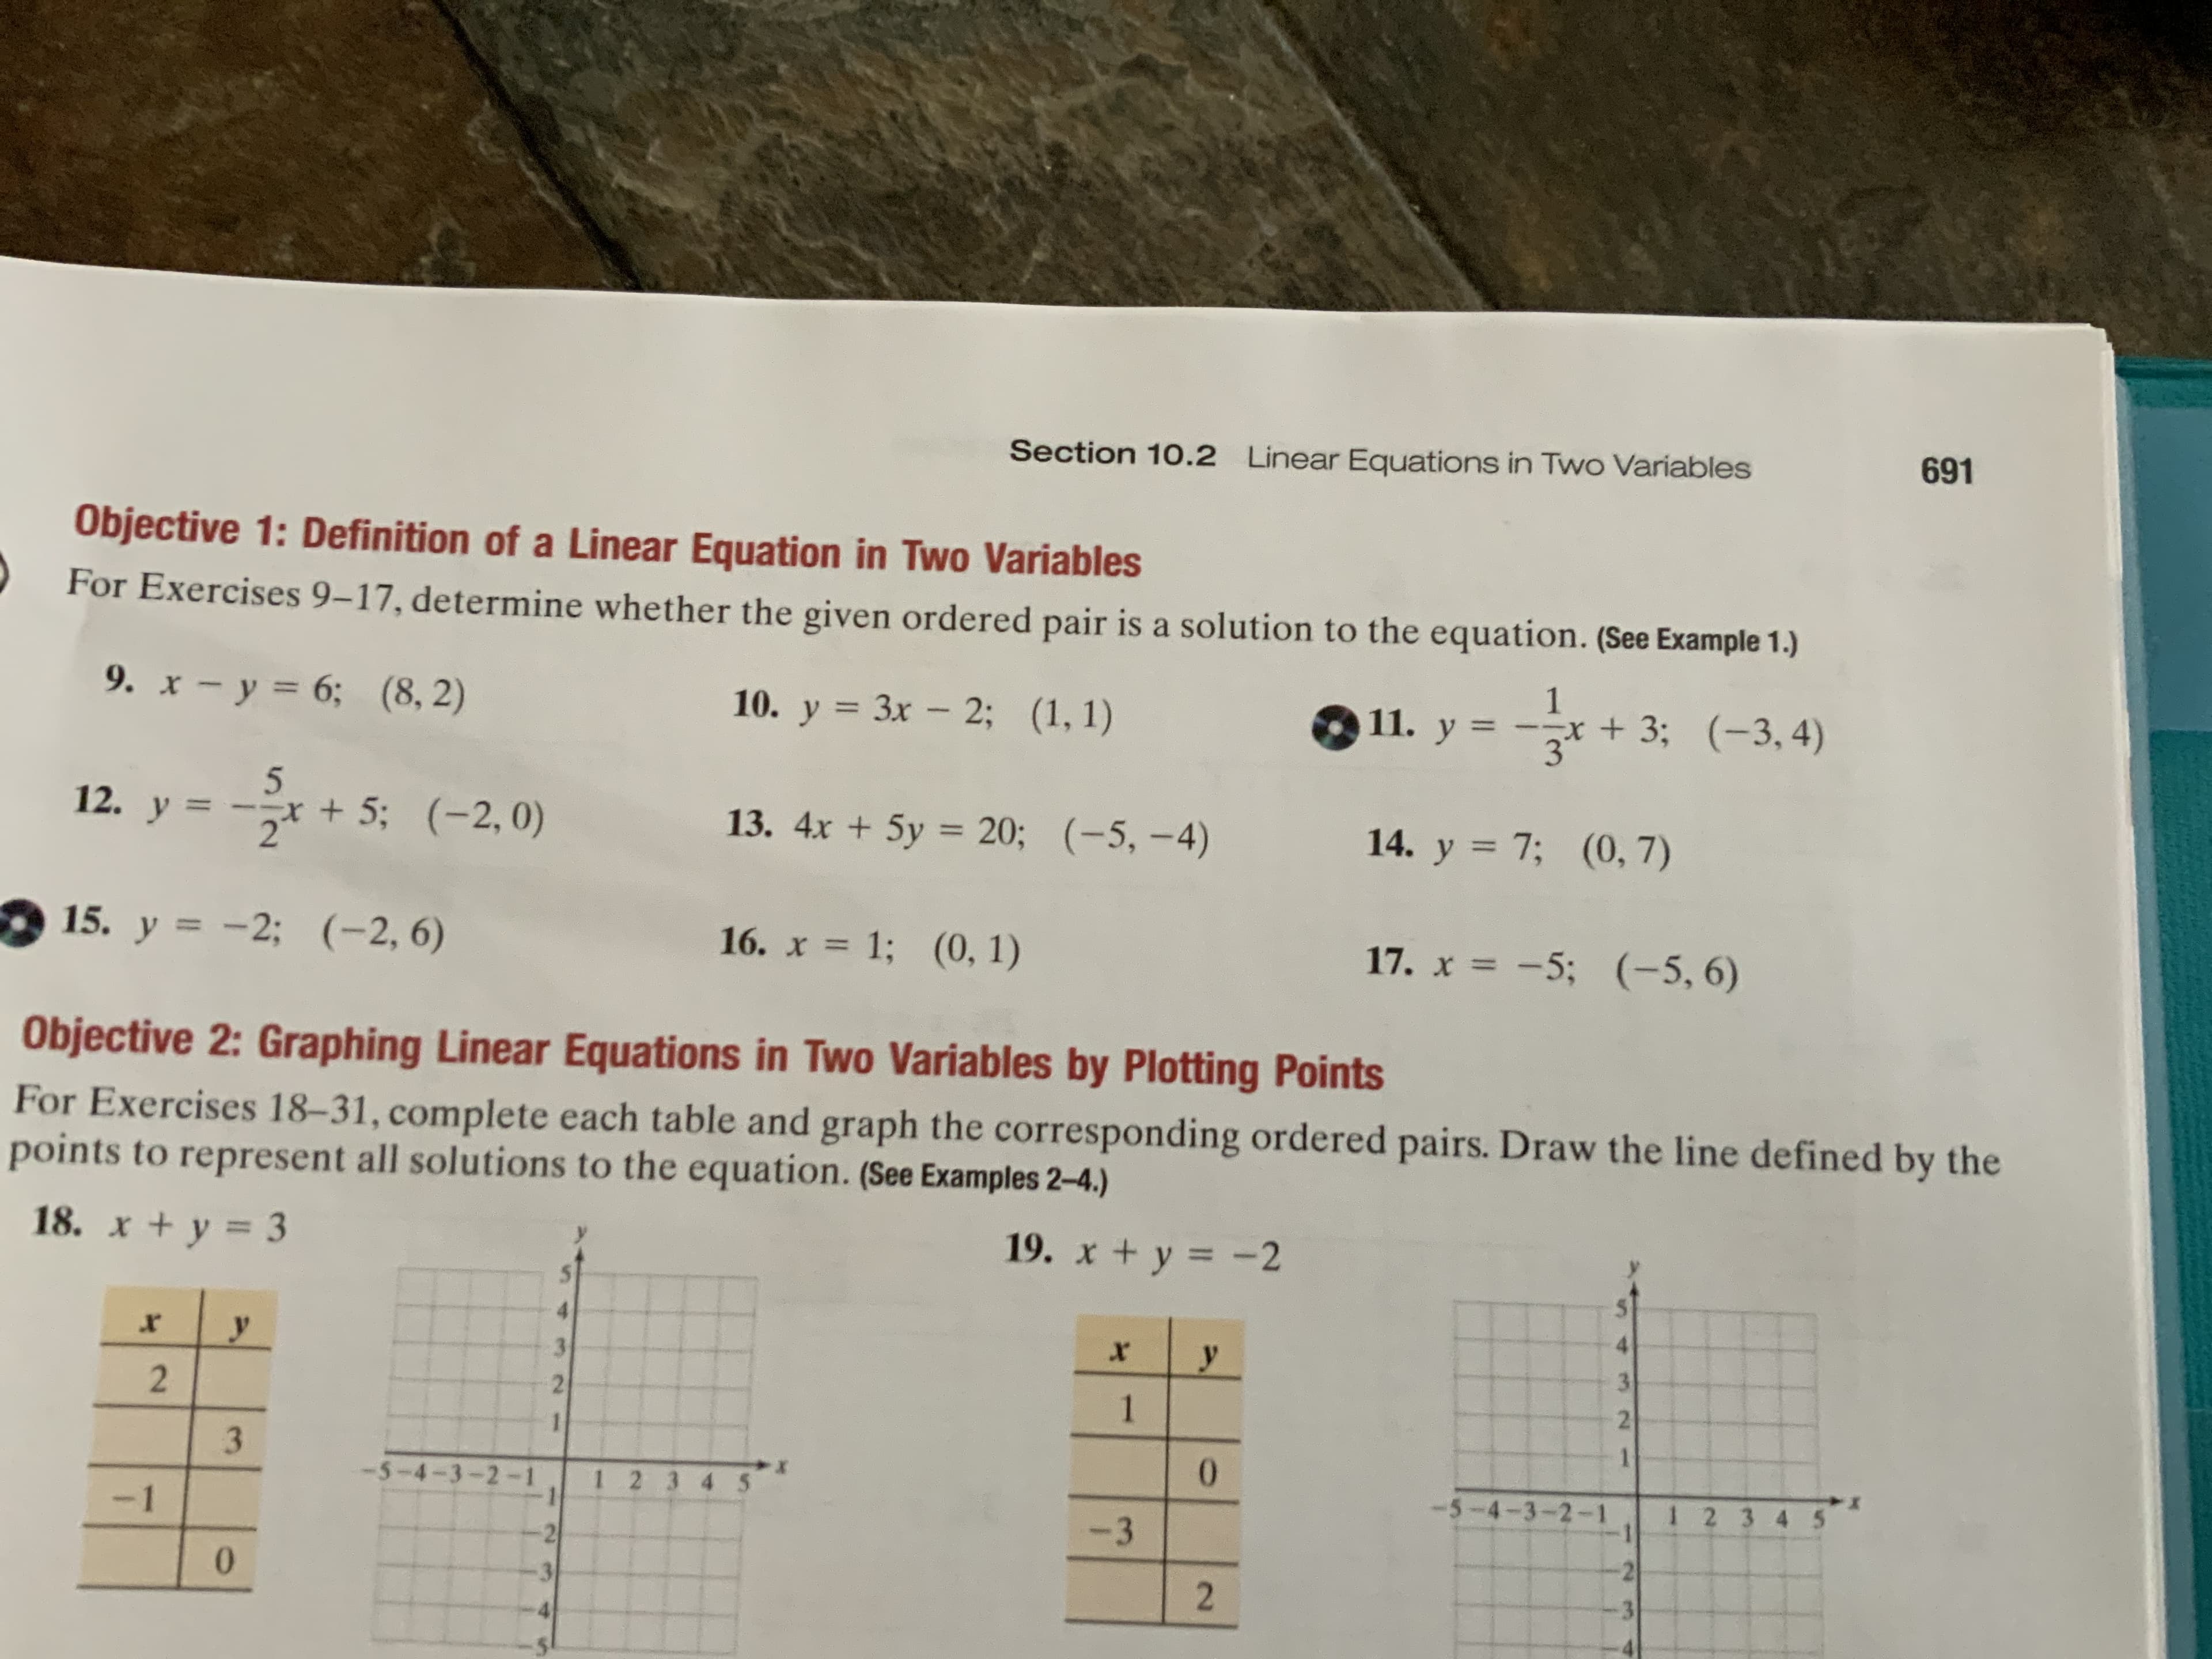 691
Linear Equations in Two Variables
Section 10.2
Objective 1: Definition of a Linear Equation in Two Variables
For Exercises 9-17, determine whether the given ordered pair is a solution to the equation. (See Example 1.)
1
+3; (-3,4)
9. x -y 6; (8, 2)
10. y 3x - 2; (1, 1)
11. y =
5
+5;
12. y
13. 4x+ 5y 20; (-5, -4)
14. y 7; (0, 7)
(-2, 0)
17. x =-5; (-5, 6)
15. y-2; (-2, 6)
16. x 1; (0, 1)
Objective 2:Graphing Linear Equations in Two Variables by Plotting Points
For Exercises 18-31, complete each table and graph the corresponding ordered pairs. Draw the line defined by the
points to represent all solutions to the equation. (See Examples 2-4.)
18. x+ y 3
19. x + y =-2
y
X
y
3
2
2
21
1
1
1
0
5-4-3-2-1
1 2 34 5
1 2 3 45
-5-4-3-2-1
-1
-3
2
MN
2
3
